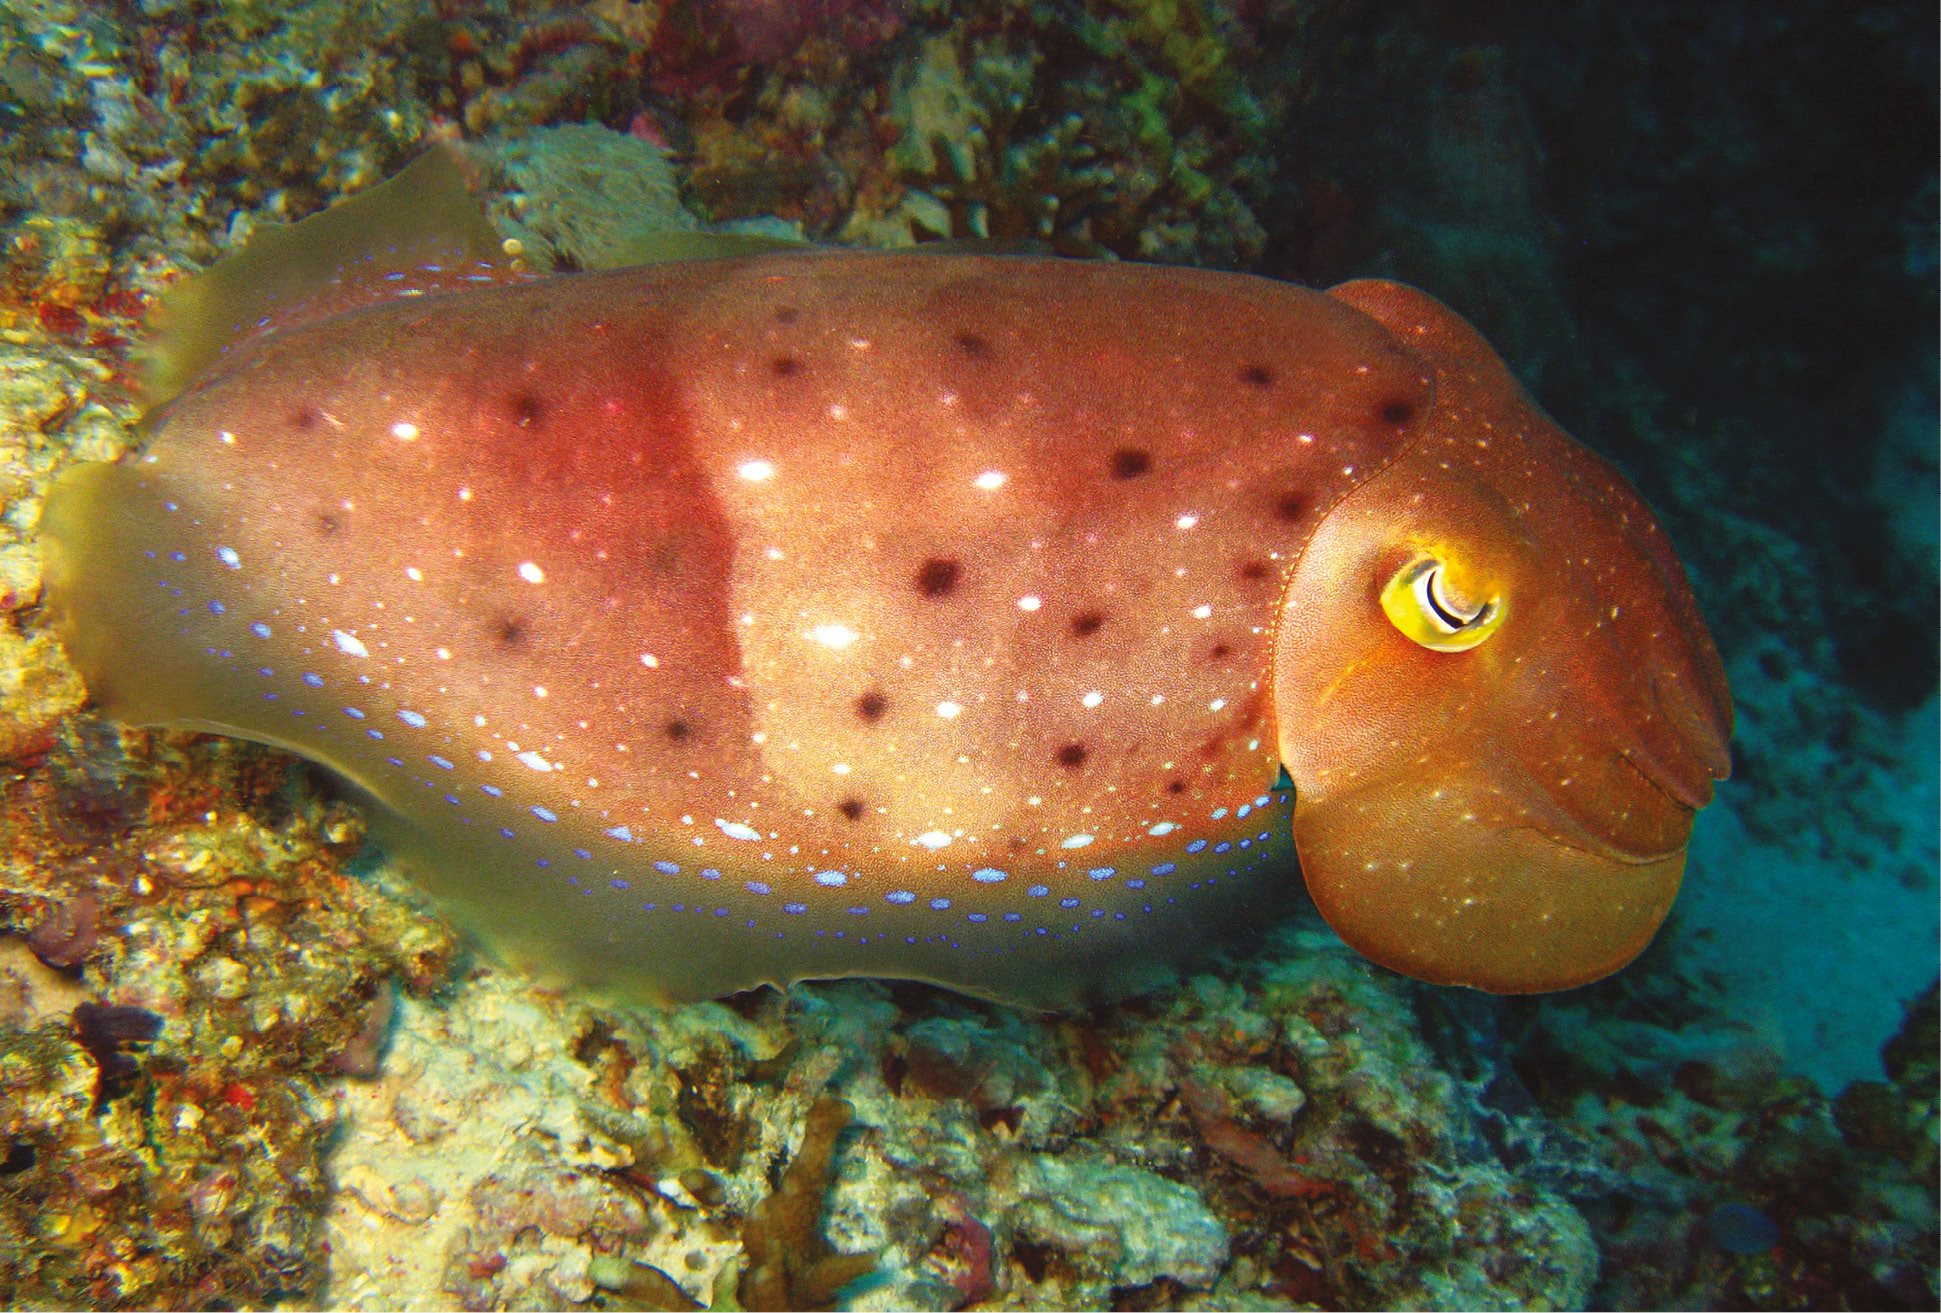 Broadclub cuttlefish is related to squid octopus and chambered nautilus - photo 8